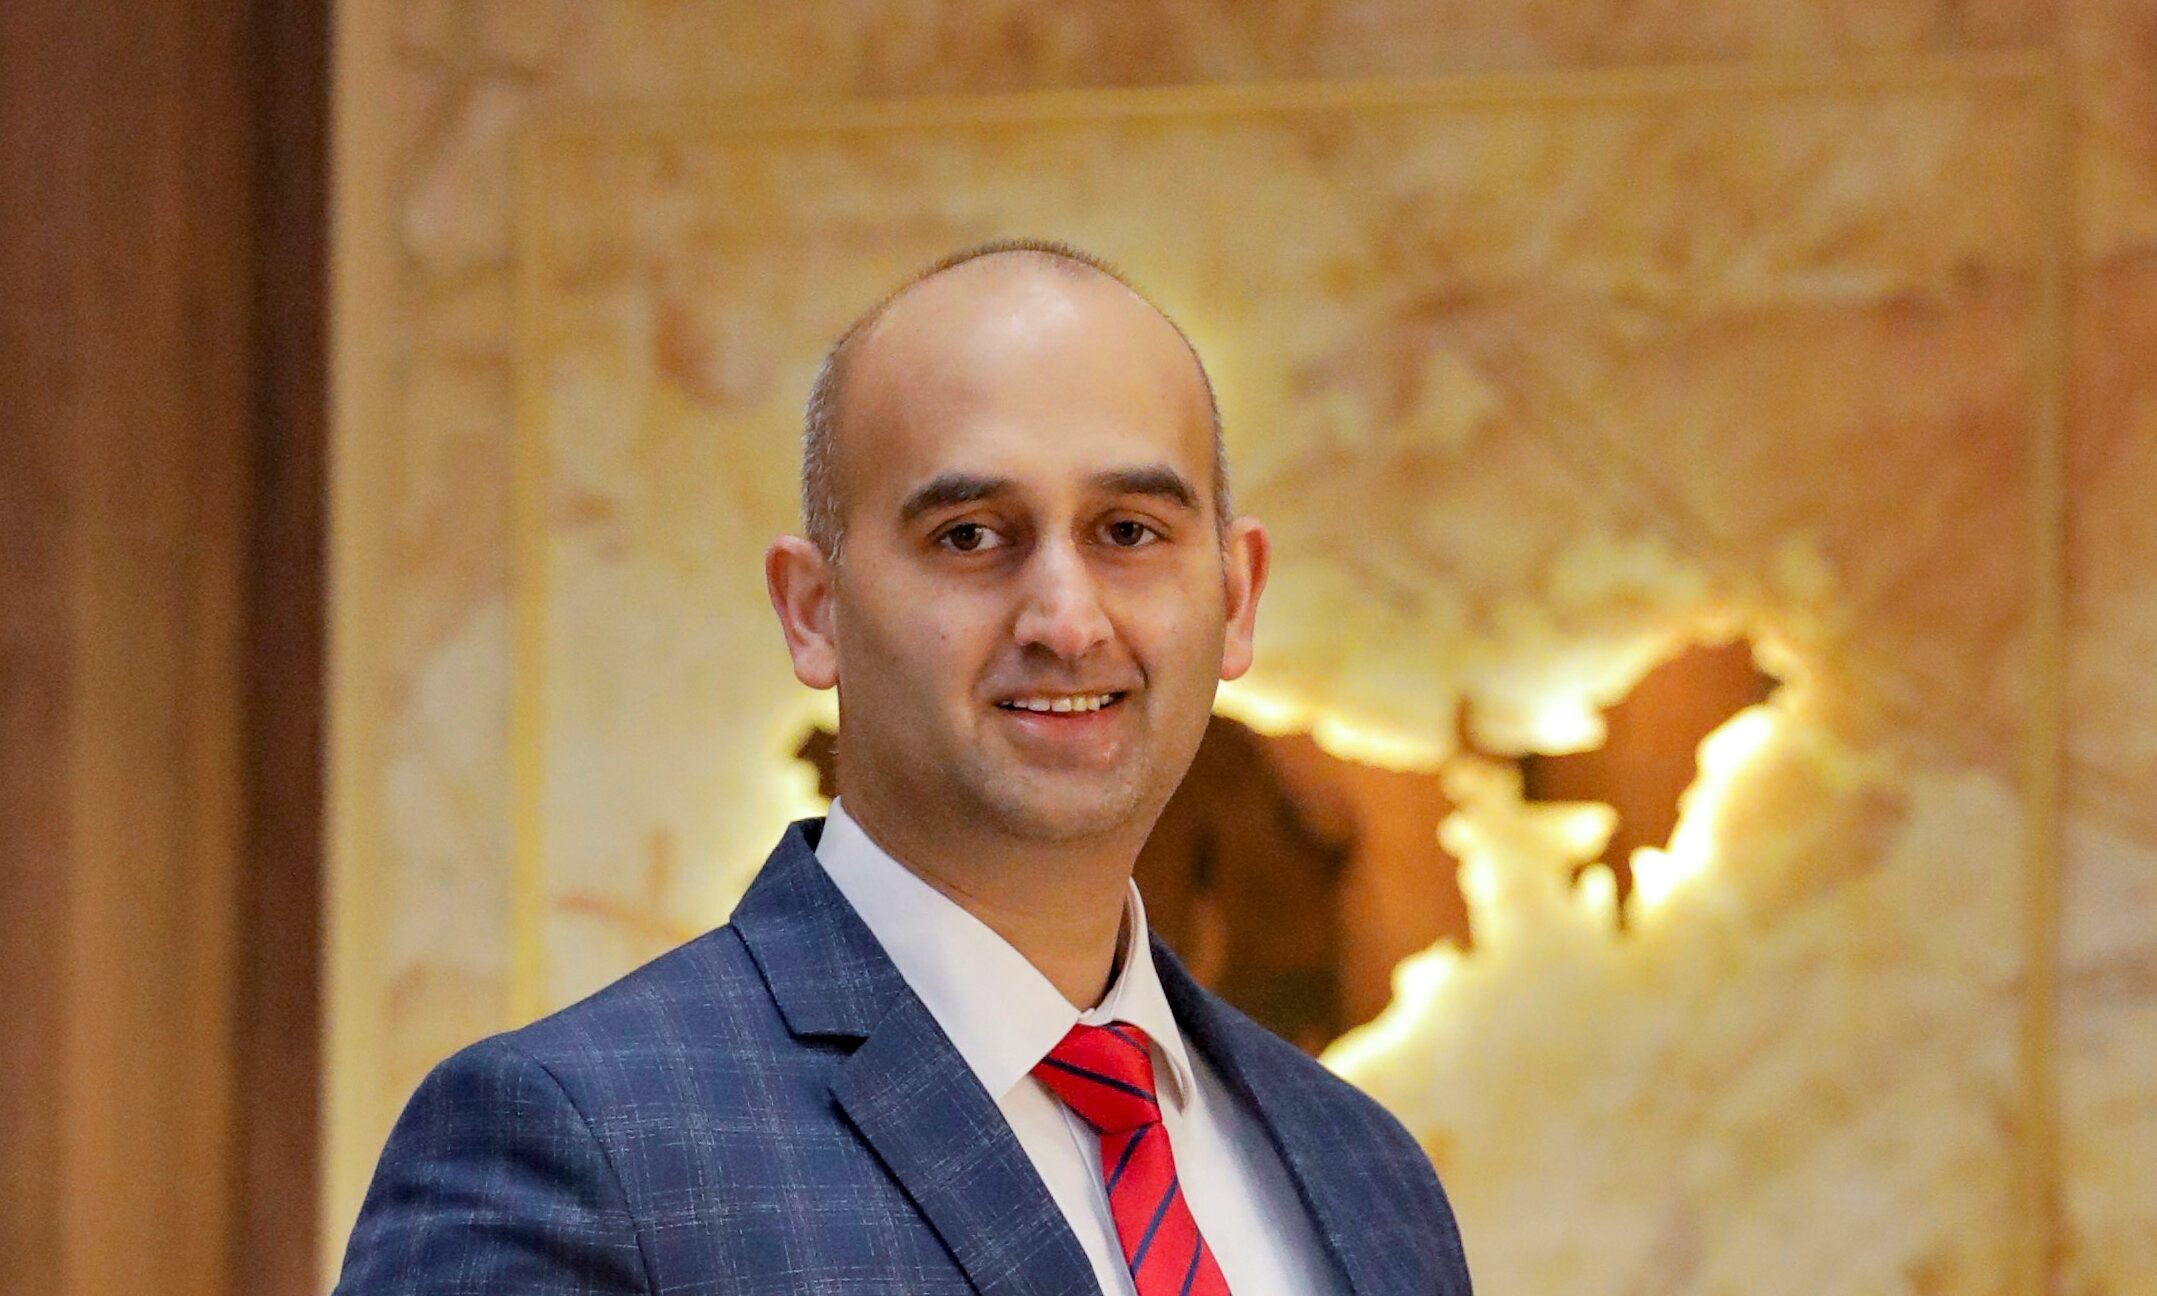 Sarovar Hotels has appointed Ankush Sharma as the new General Manager - Development. Sharma brings with him more than two decades of diverse experience in the domestic and global hospitality industry and has been associated with pre-openings as well as running hotels. His last assignment was as General Manager for The Gaurs Sarovar Portico, Greater Noida. Sharma possesses niche expertise in starting new operations, having created restaurant concepts, opened hotels, and spas. His experience encompasses Operations Management, Sales & Marketing, E-Commerce, Liaison, Pre Opening and Project Management. Before associating with Sarovar Hotels, he was the General Manager at Ramee Rose, Bahrain and the General Manager for Clarion Collection, Qutab, New Delhi. In the past, he has worked with hospitality brands like Taj Group Of Hotels, Intercontinental Hotels Group, etc. He is a Business Hotel Manager holding a Hotel Management degree from AMC College of Hotel Management, Bangalore and an MBA from Amity University. He is the recipient of the top most hospitality icons General Manager Award by World Leadership Congress and Awards 2022.